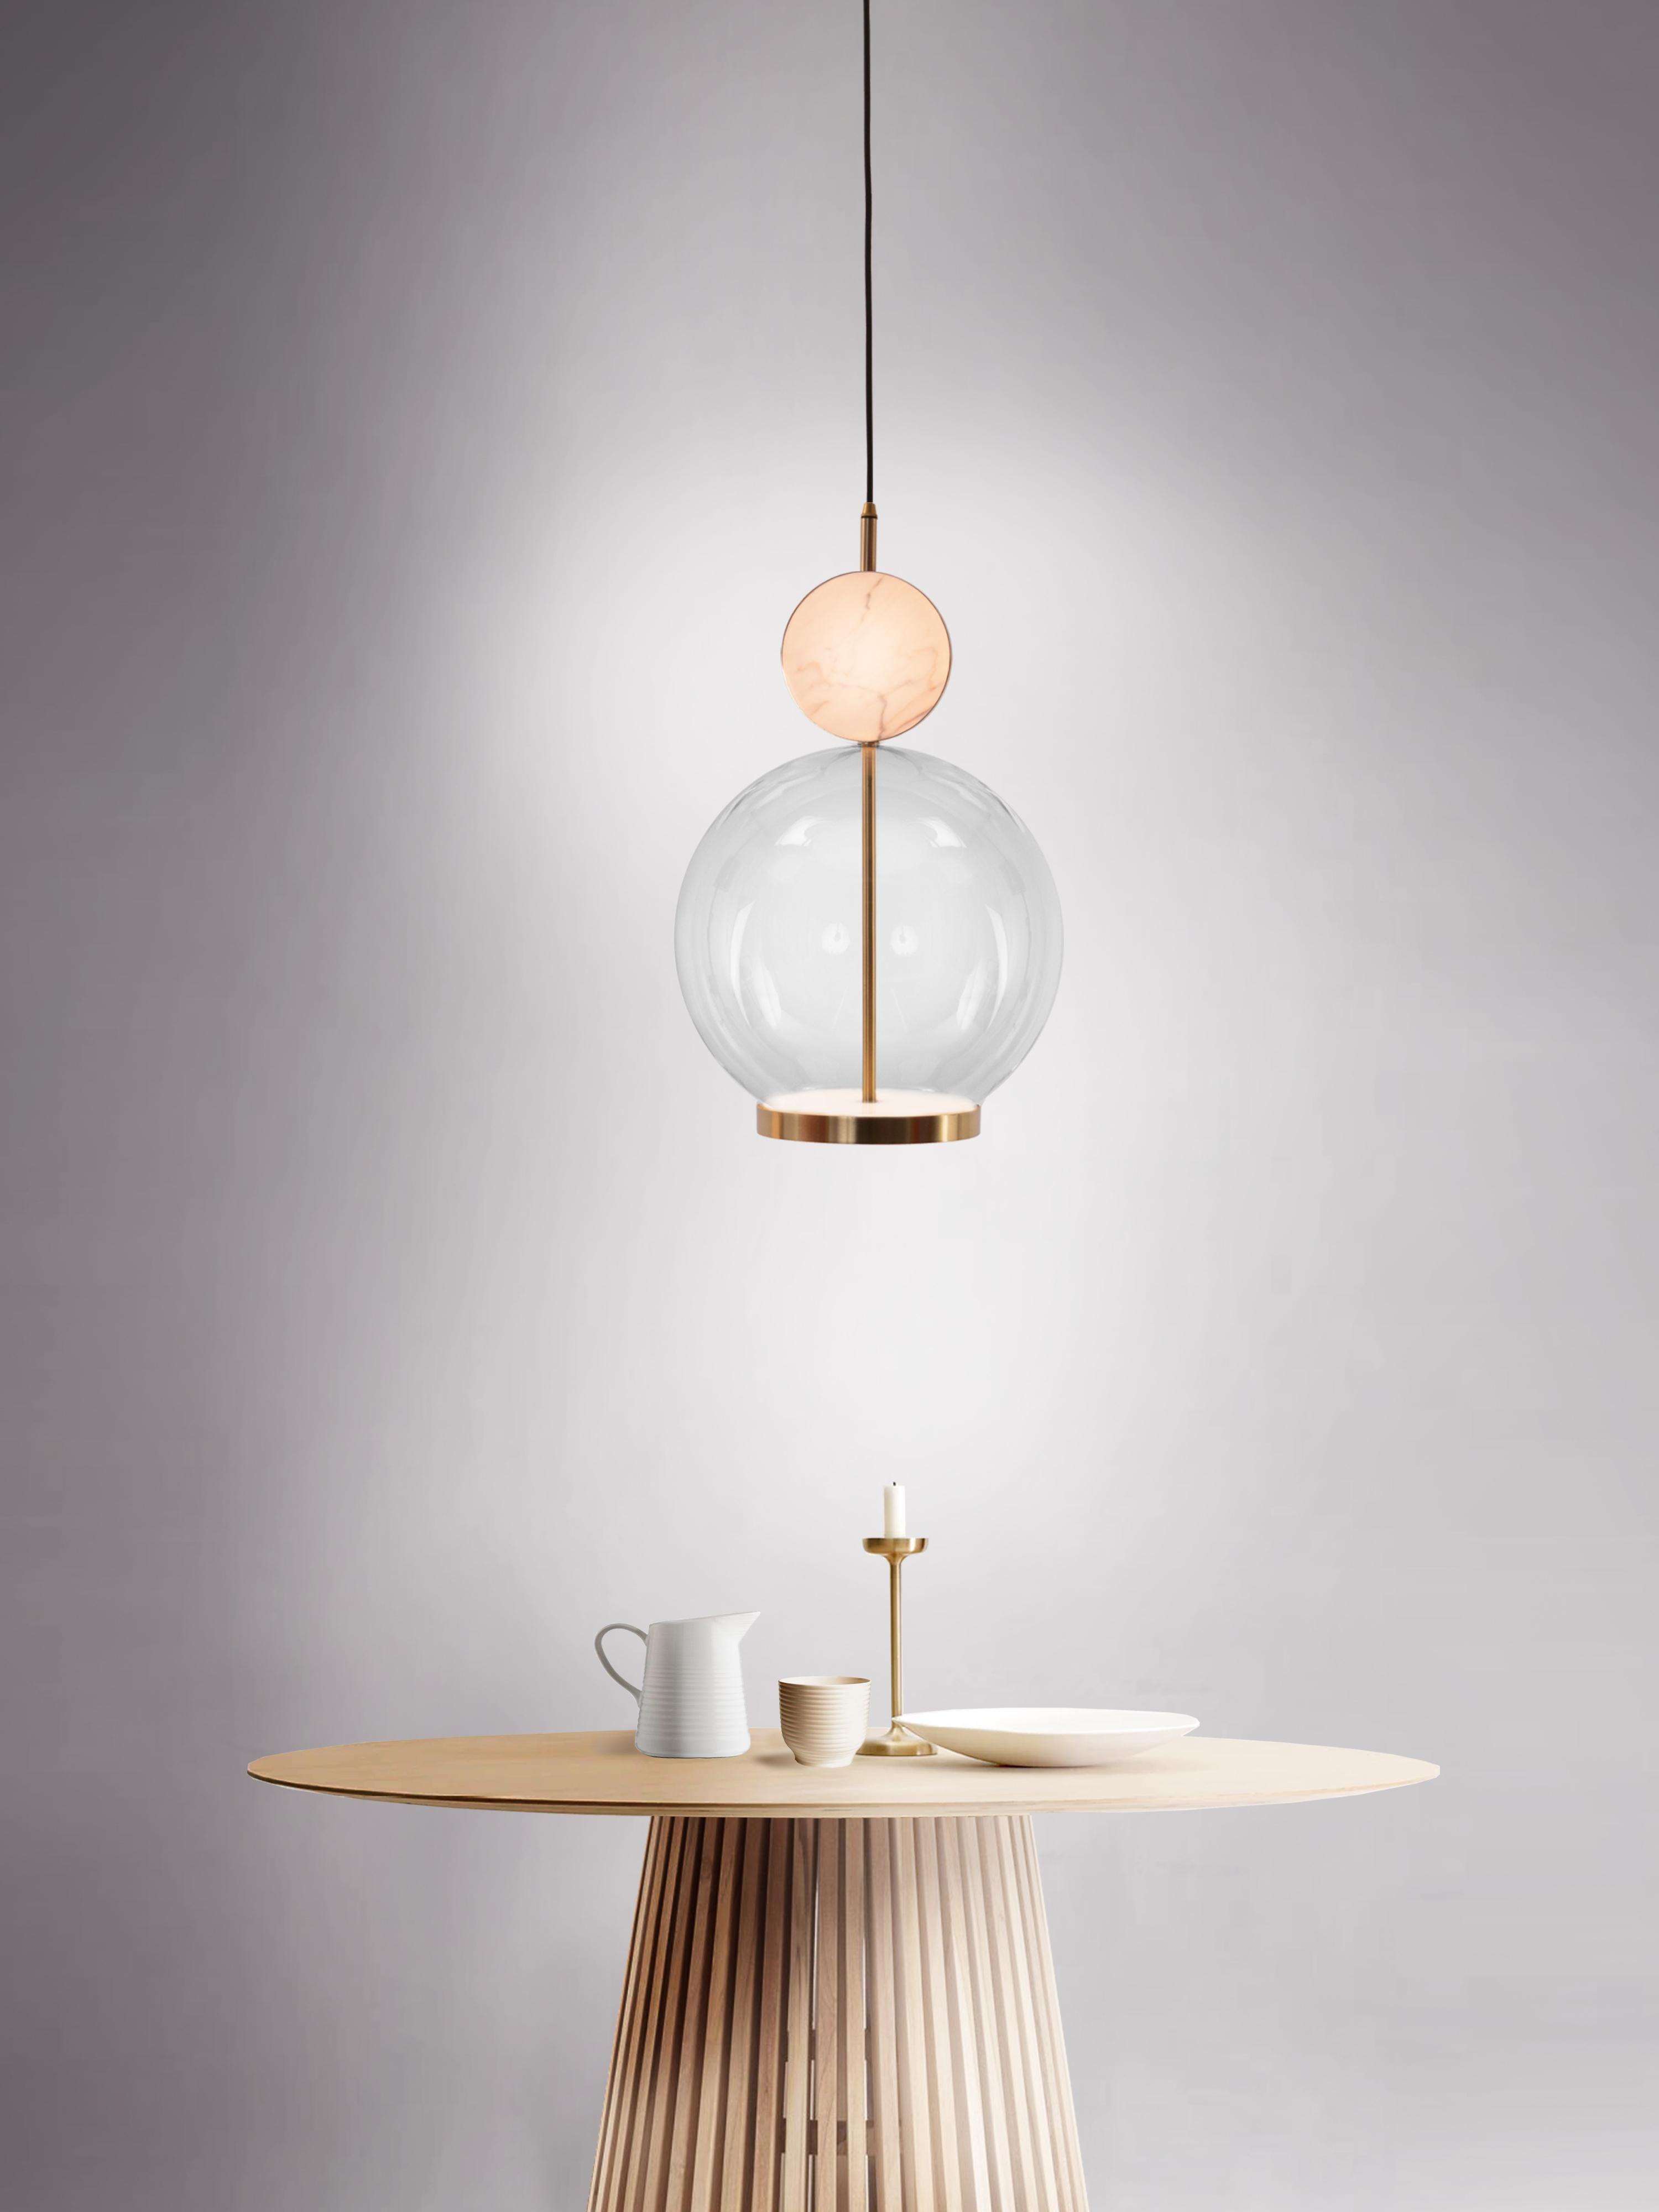 The Rosa collection was designed to showcase the opaque beauty of natural marble. The pendant incorporates a backlit Rosa Estremoz marble disc that emits a soft, warm illumination, pierced by the natural veining of the stone.

The double faced LED